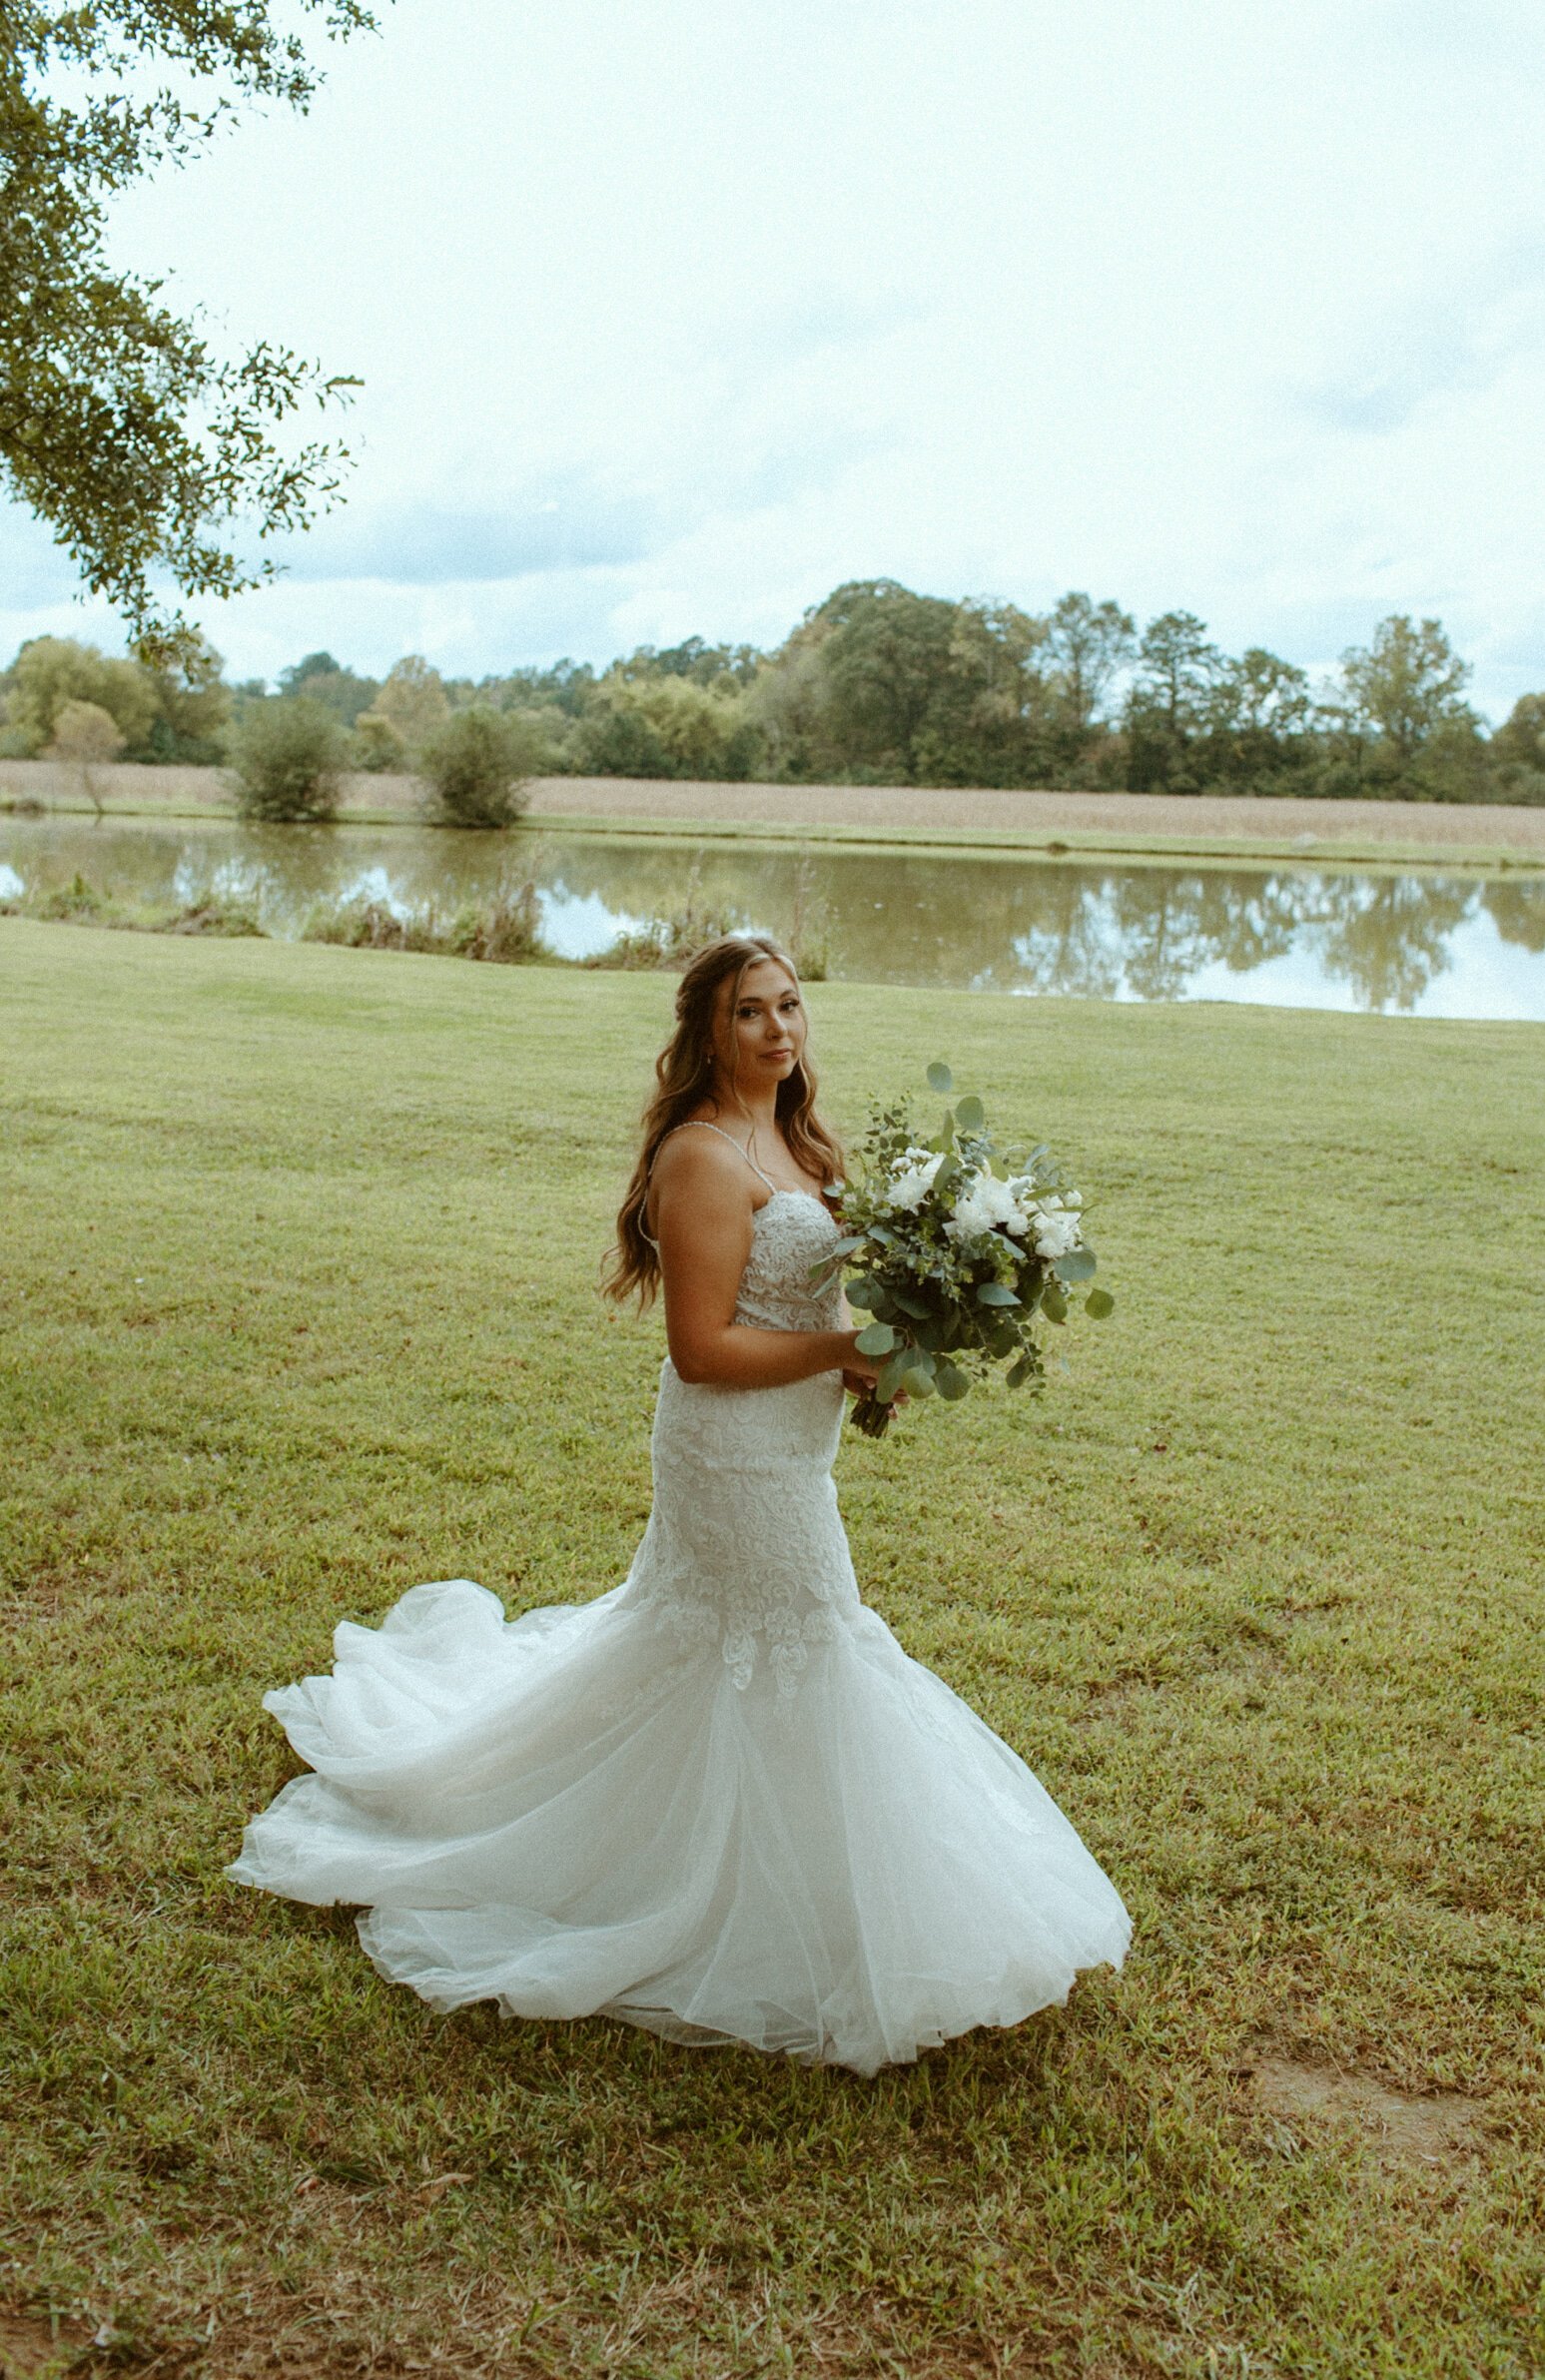 ivory-and-beau-bride-autumn-real-bride-maggie-sottero-wedding-dress-bridal-gown-wedding-gown-bridal-shop-bridal-boutique-bridal-shopping-savannah-georgia-fitted-fit-and-flare-ivory_MG_1188.jpg